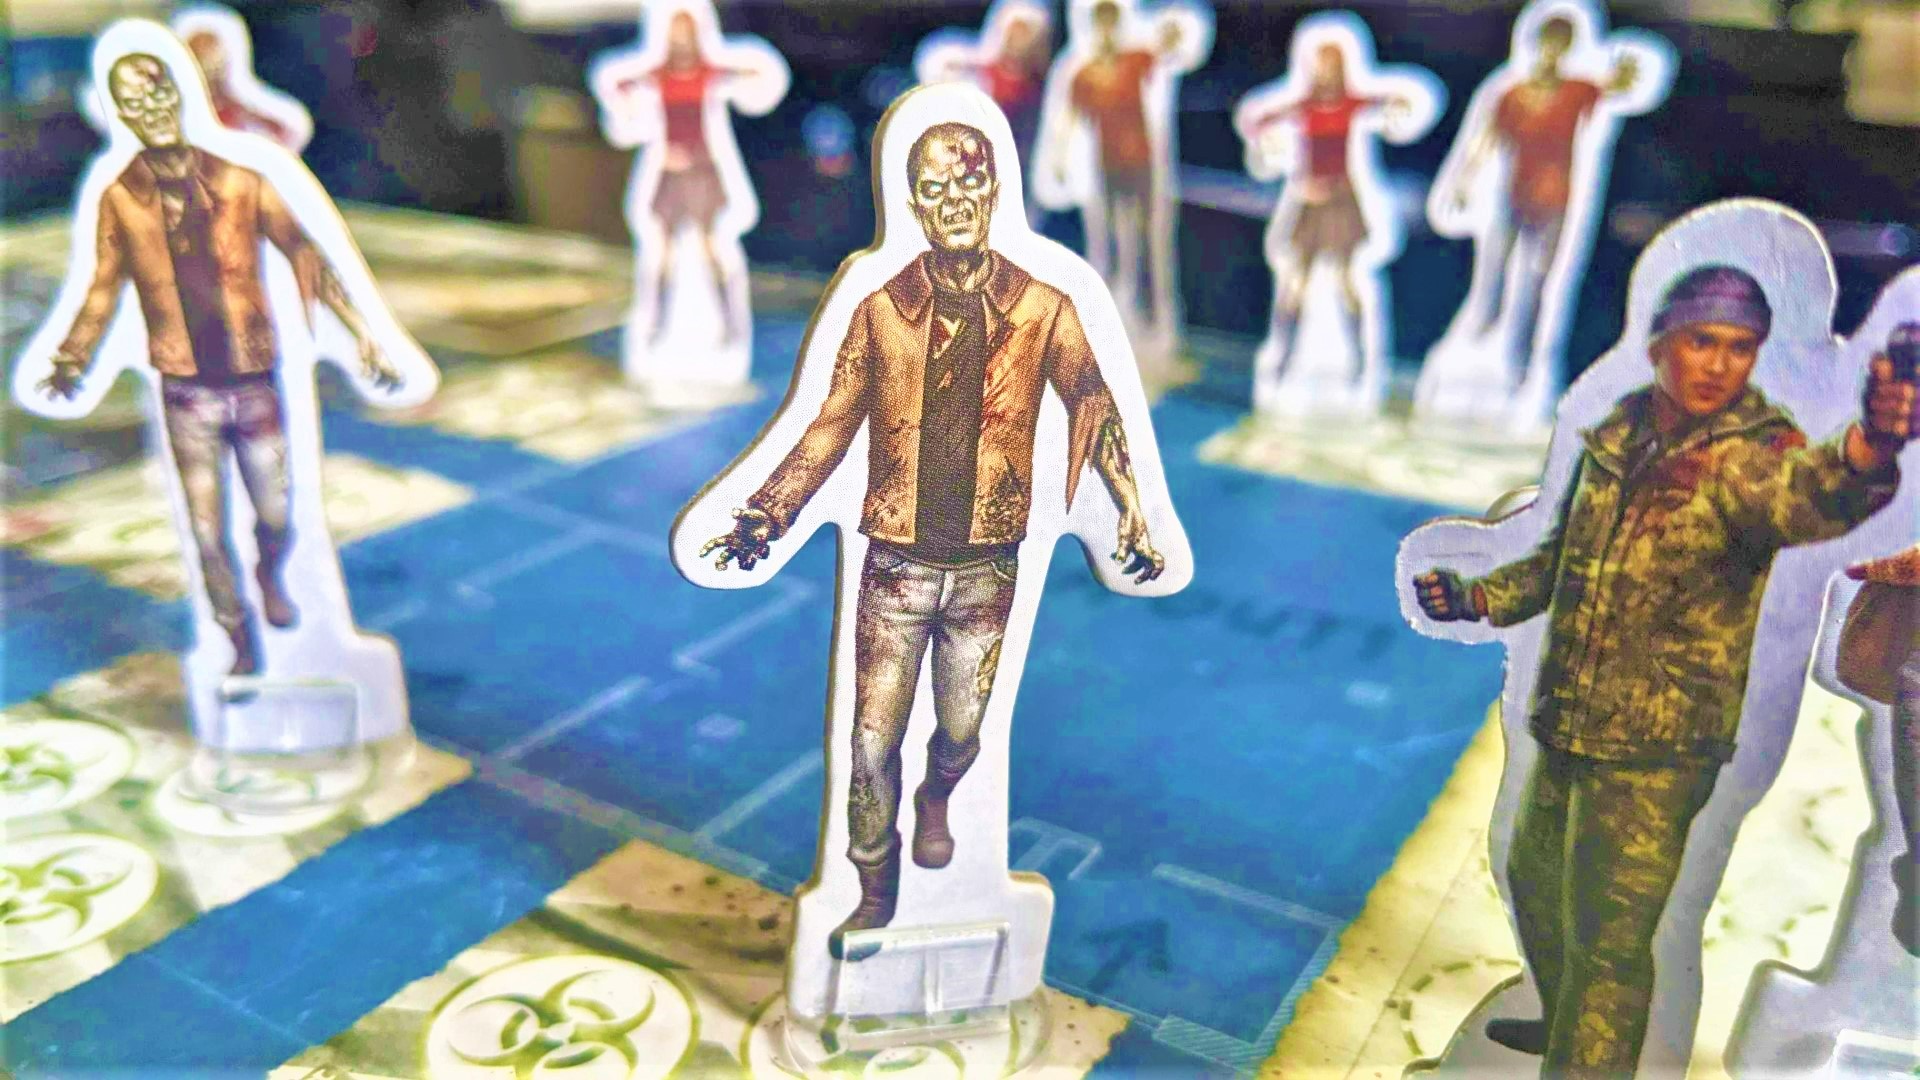 Backstab your friends in the newest tabletop social deception game - 𝗧𝗵𝗲 𝗦𝗲𝗰𝗿𝗲𝘁  𝗡𝗲𝗶𝗴𝗵𝗯𝗼𝗿 𝗣𝗮𝗿𝘁𝘆 𝗚𝗮𝗺𝗲, out now! ➡️ Store link